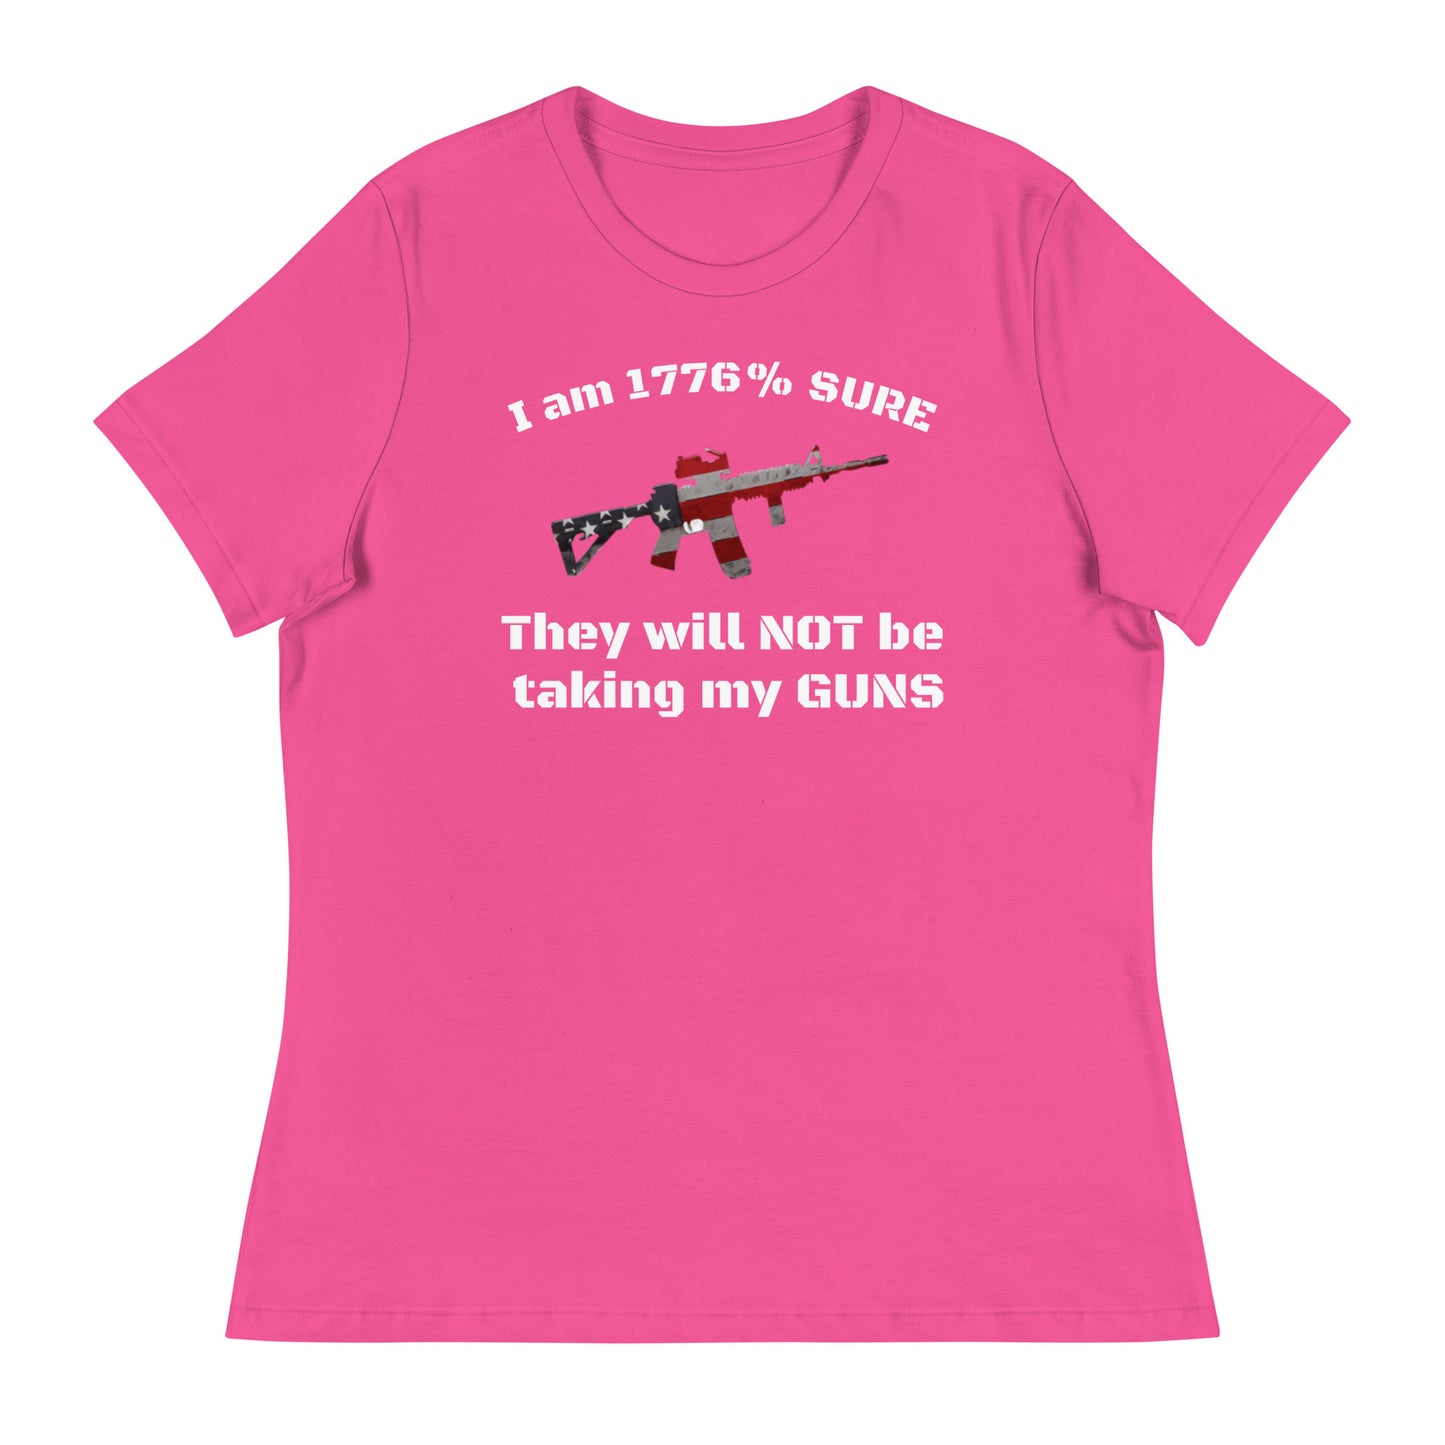 I am 1776% Syre They will not be taking my guns Women's T-Shirt